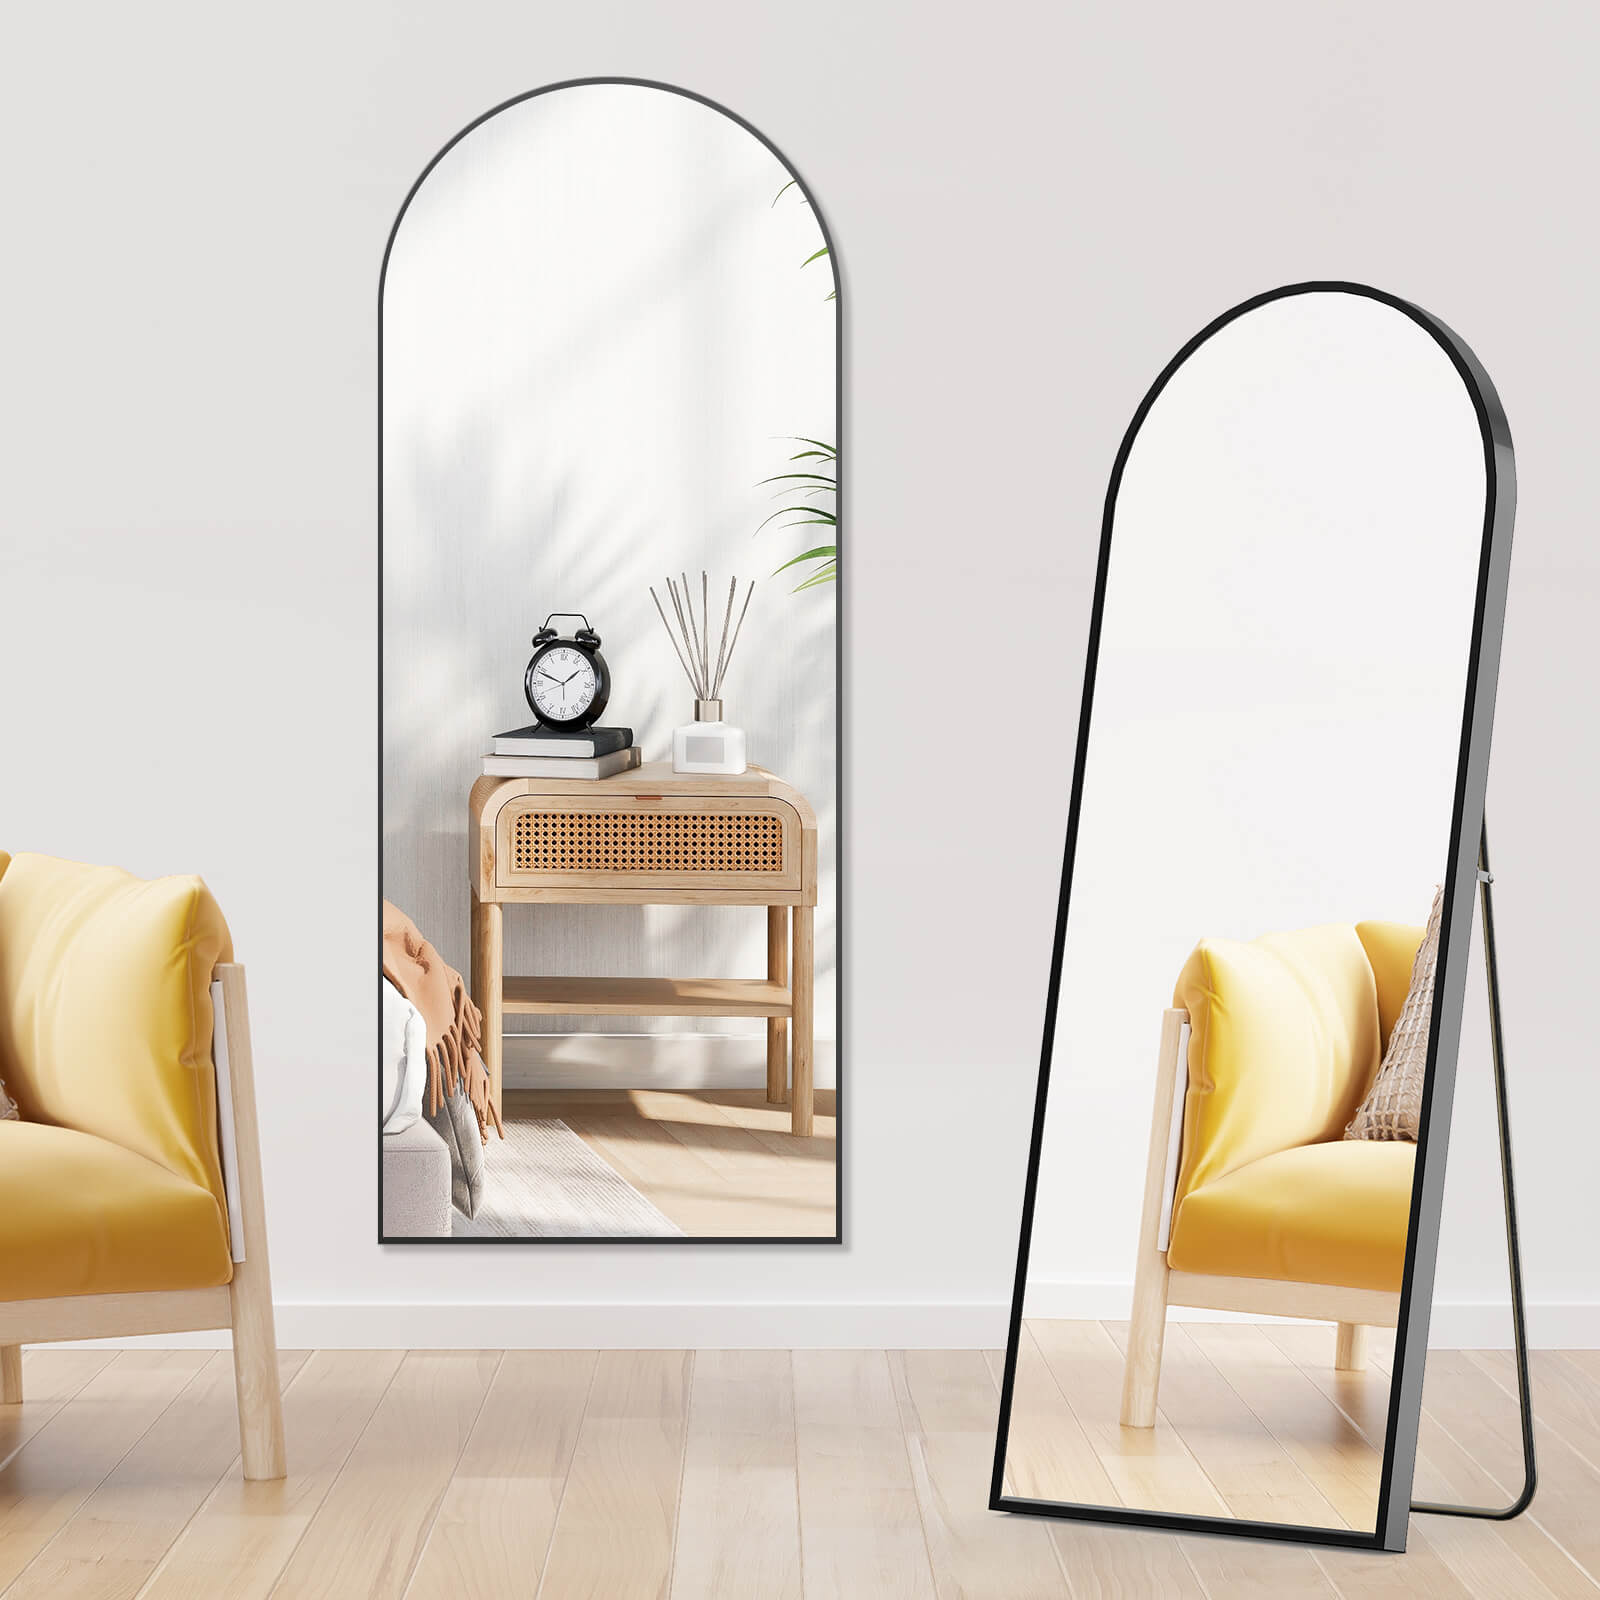 59"x16" Floor Standing Mirror, Wall Mirror with Stand Aluminum Alloy Thin Frame